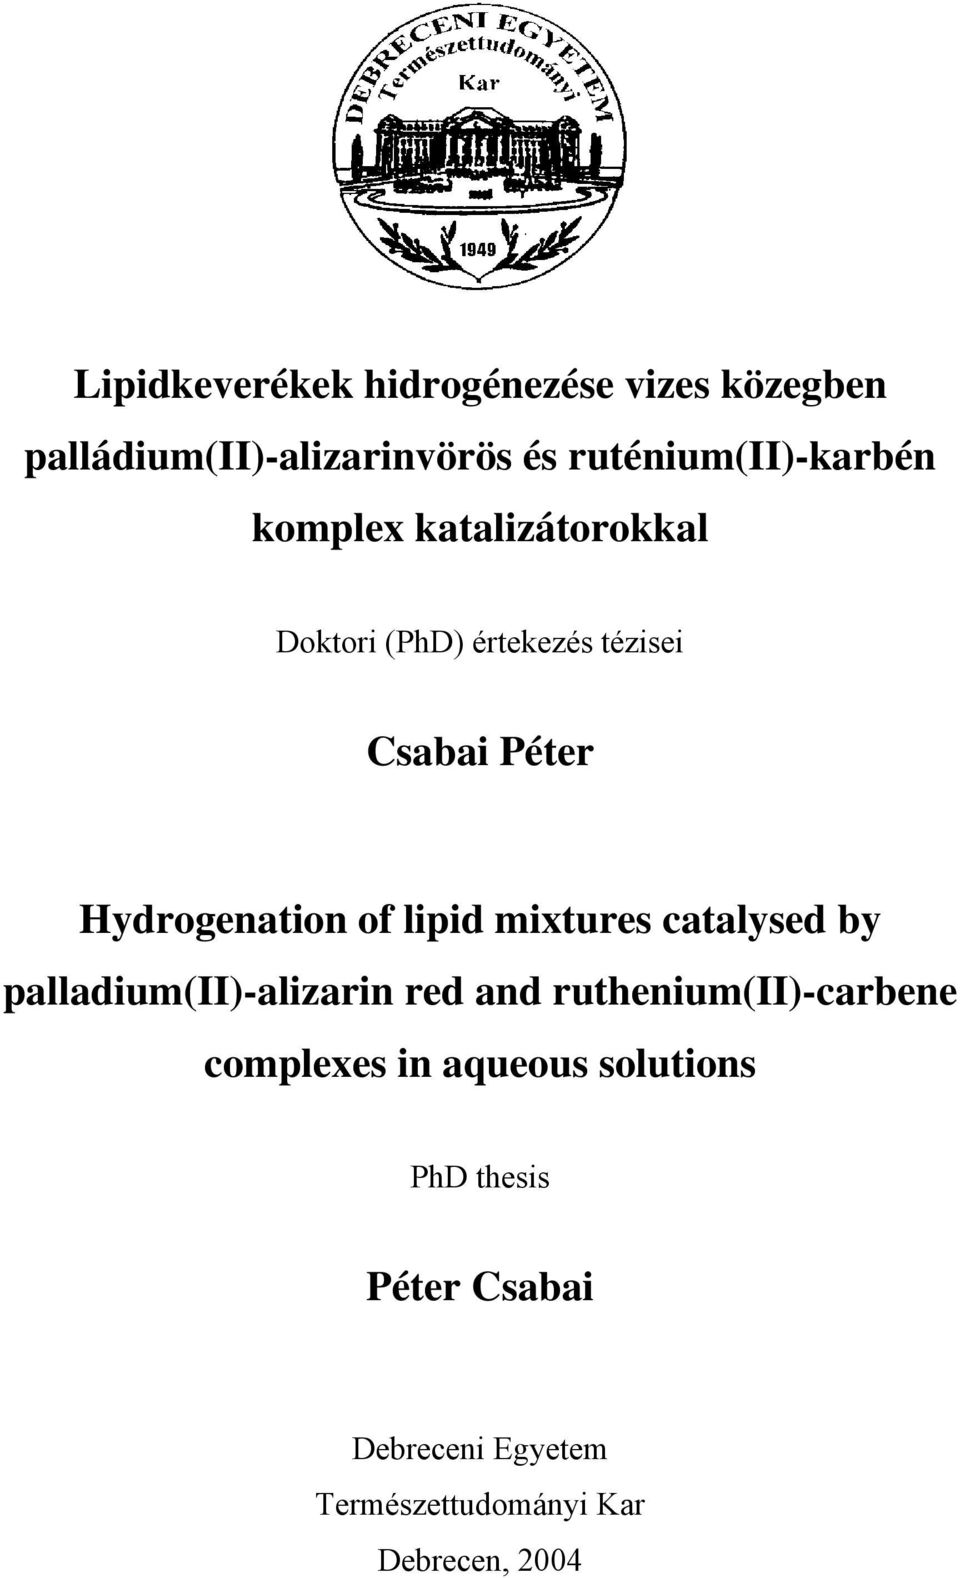 Hydrogenation of lipid mixtures catalysed by palladium(ii)-alizarin red and